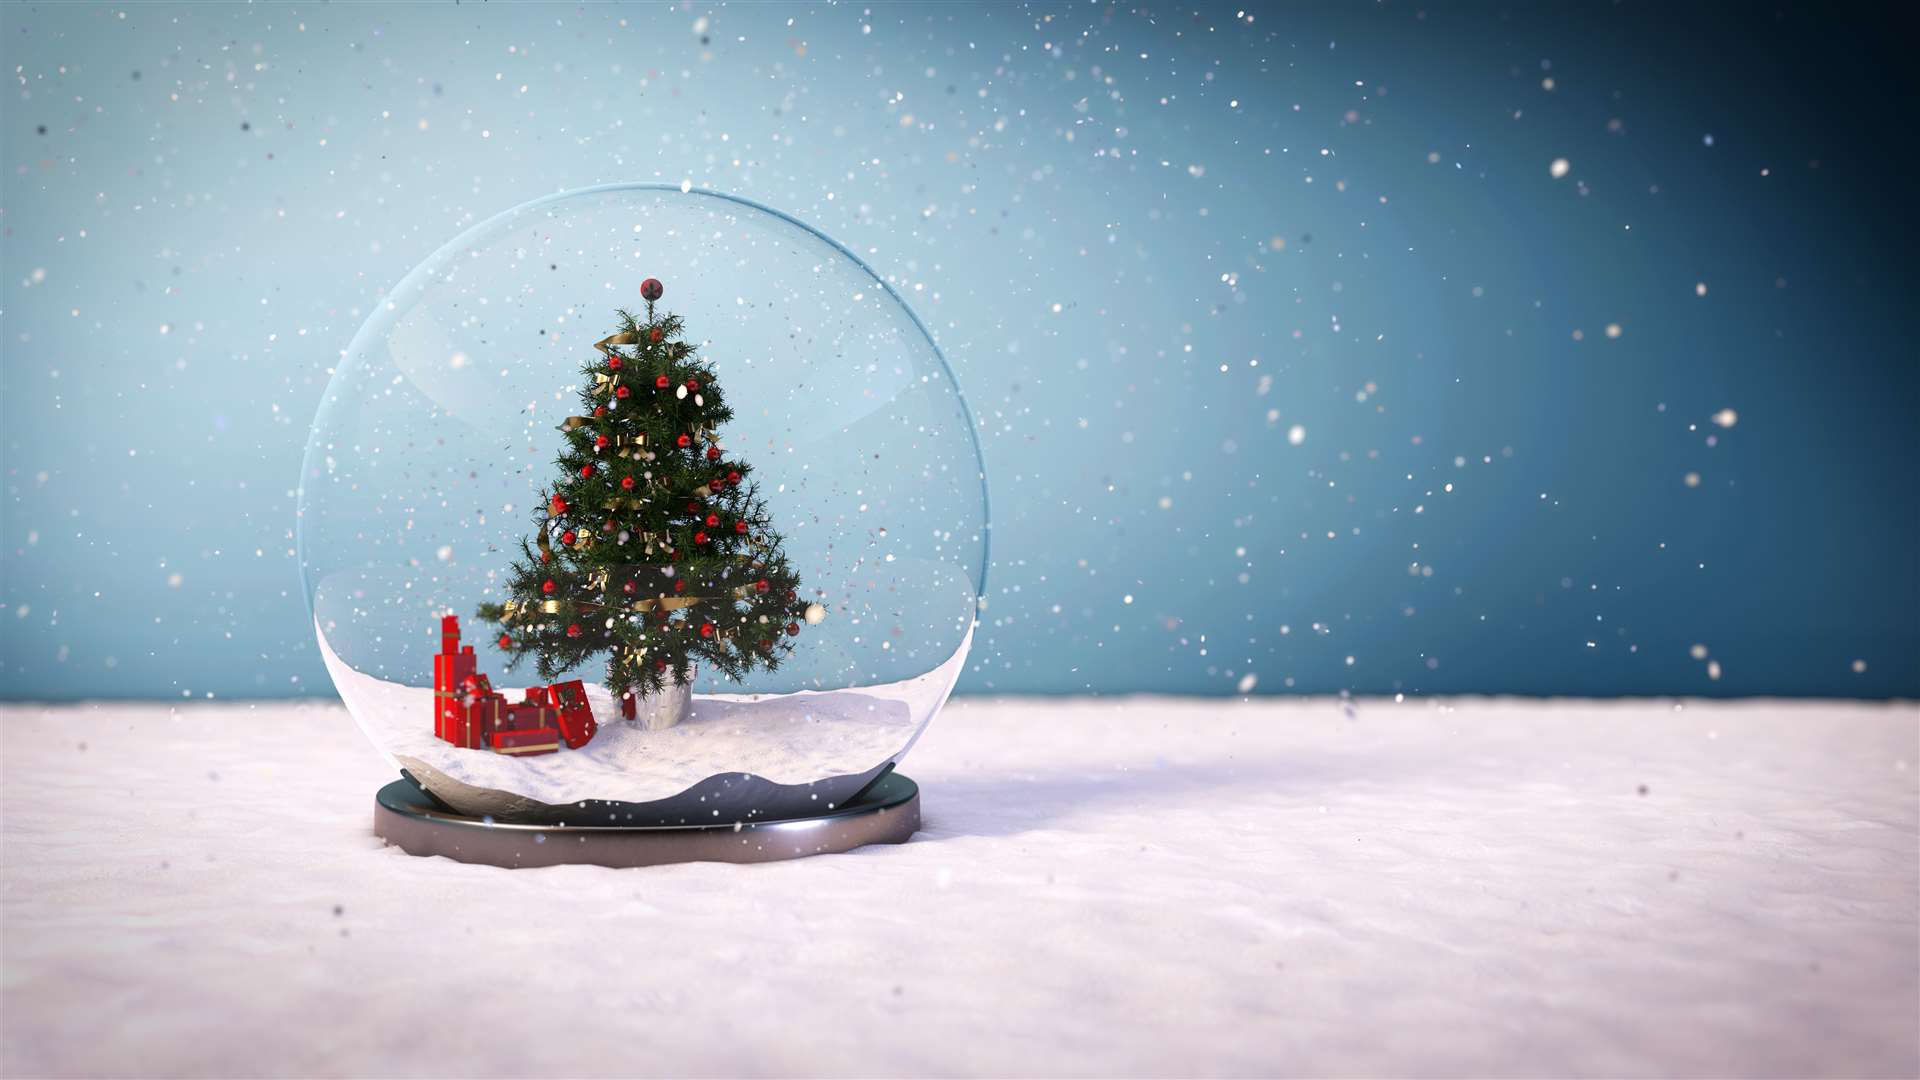 The blaze was started by a snow globe. Picture: iStock